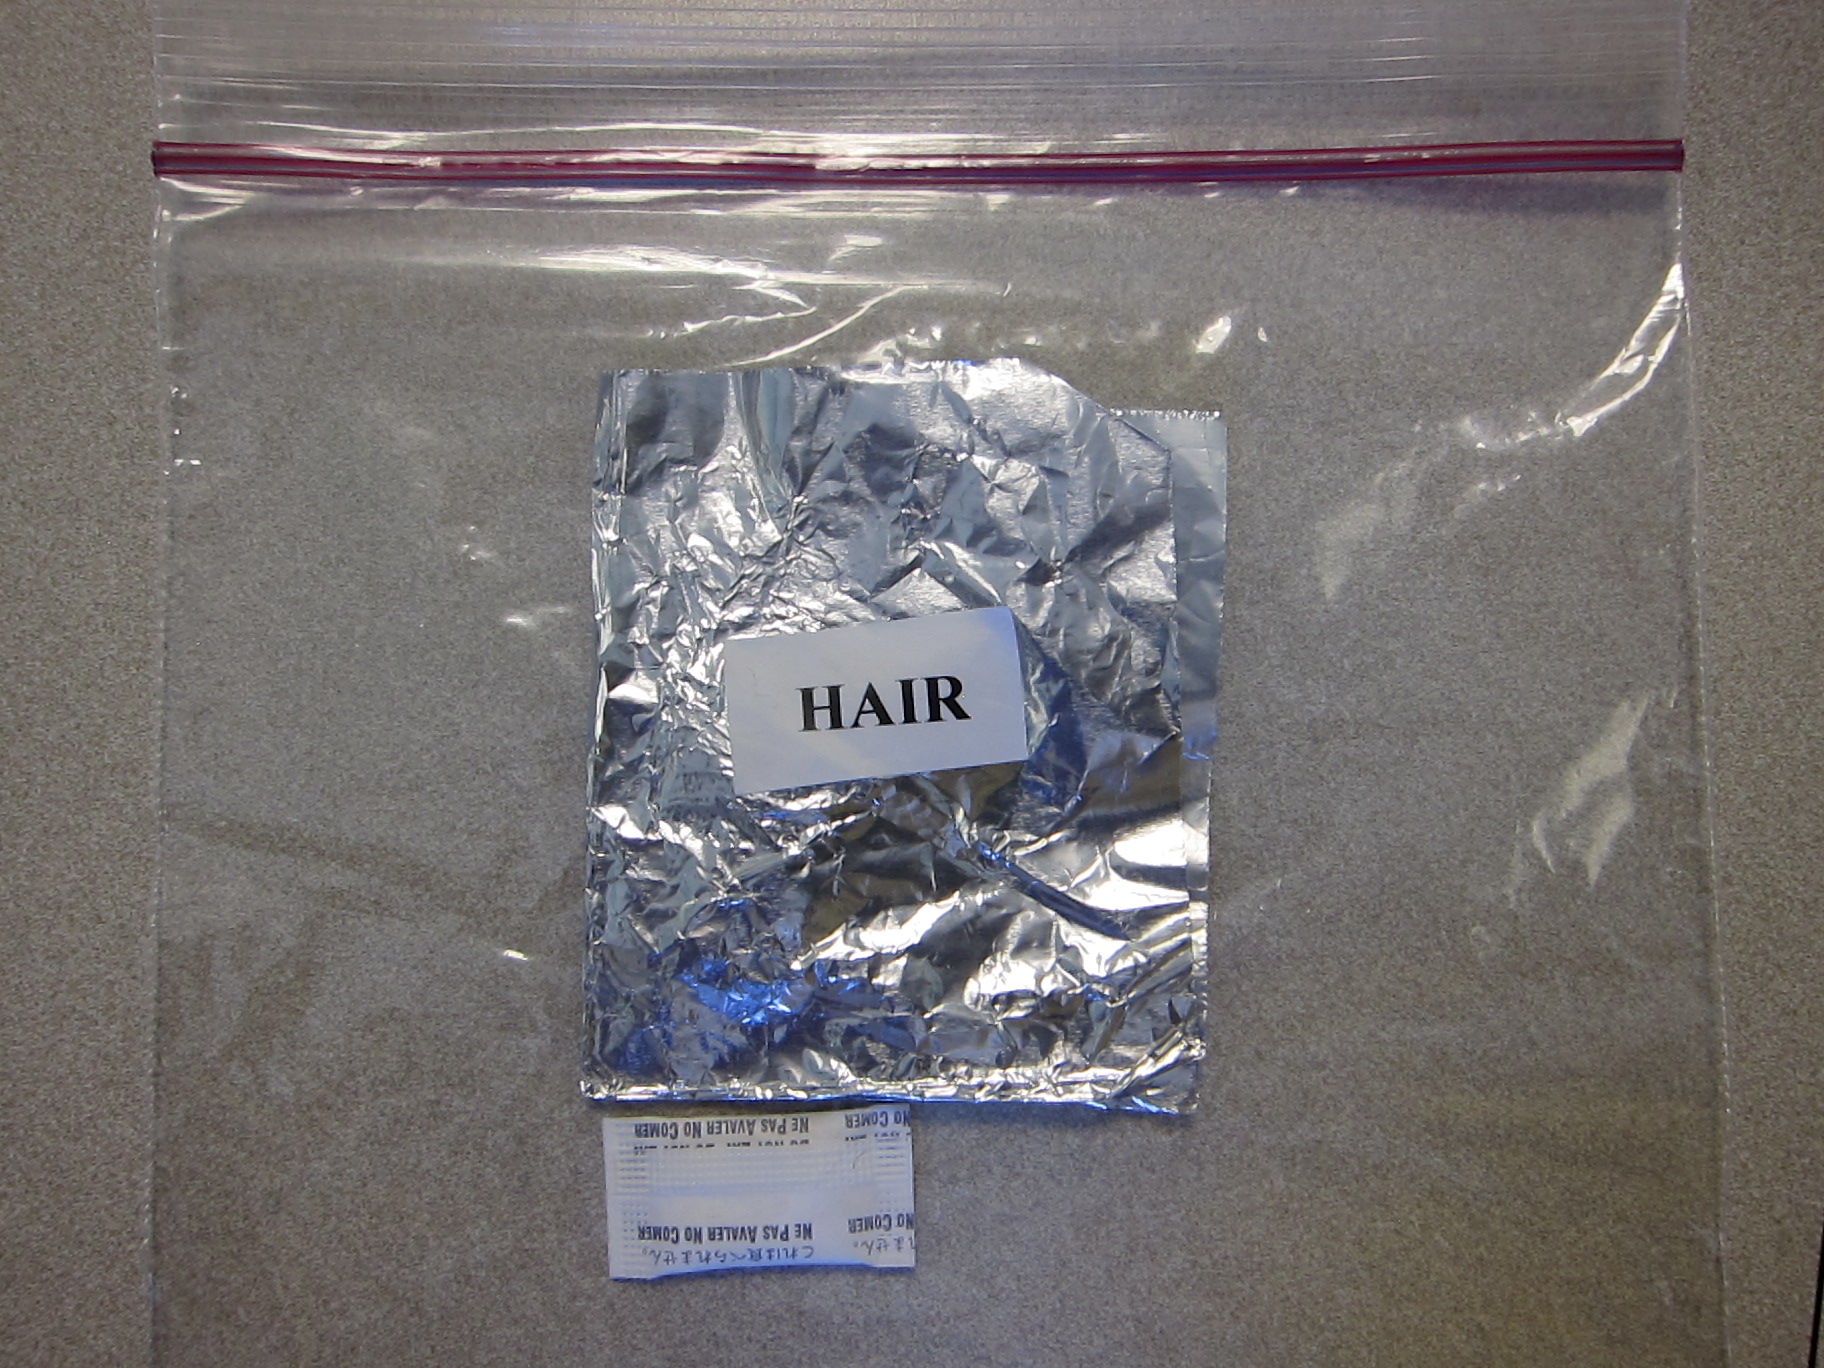 a hair sample wrapped in foil and then sealed inside a zip lock plastic bag